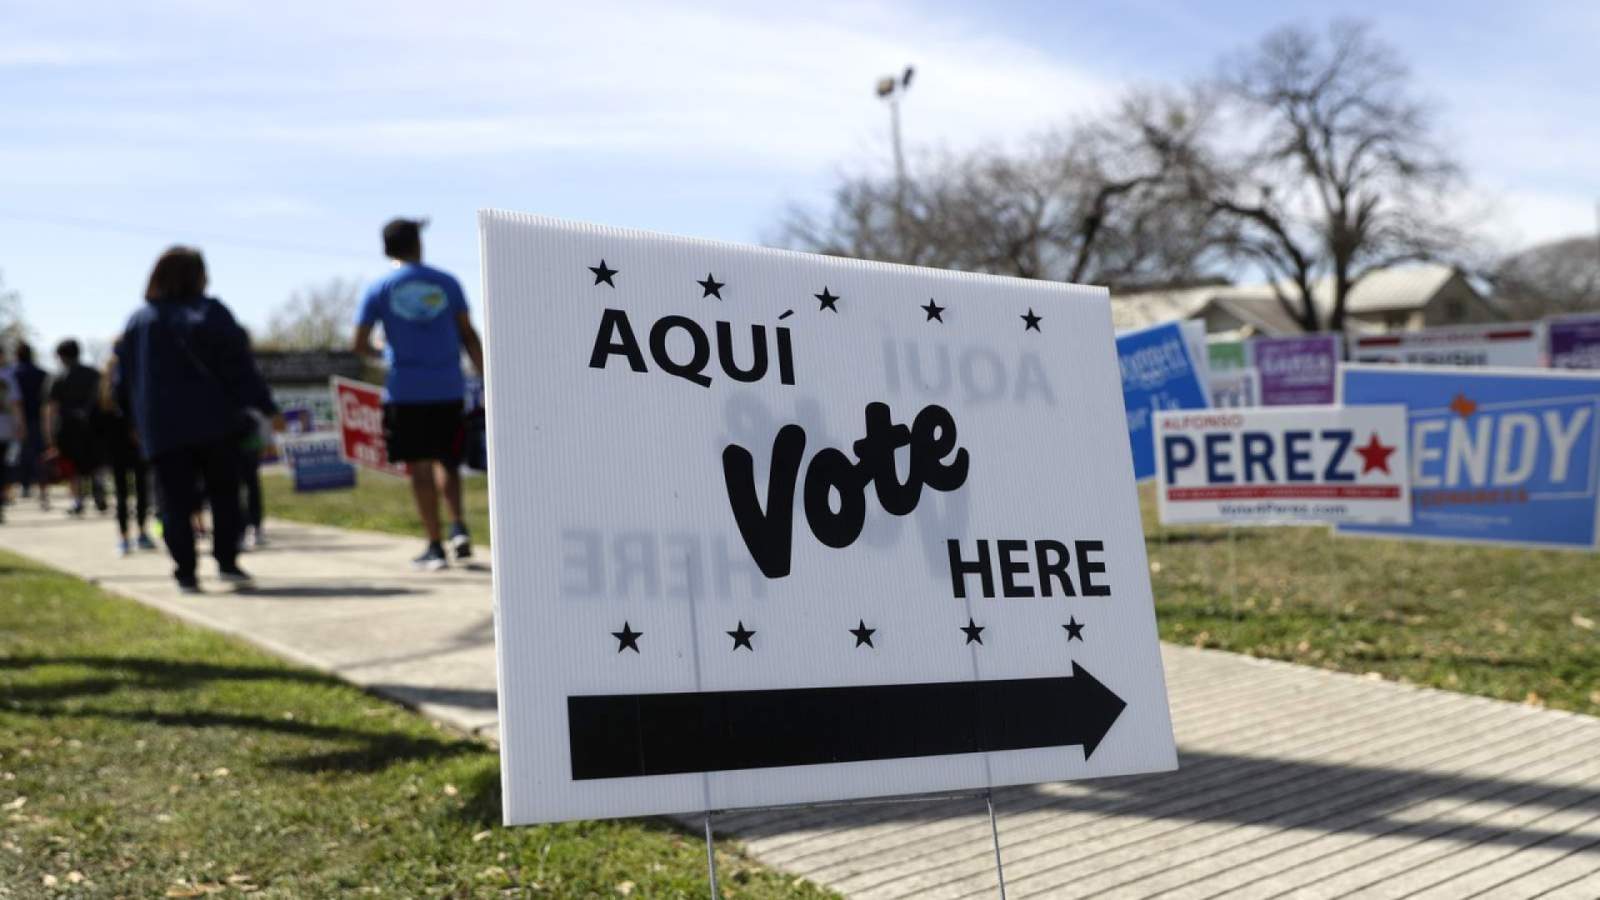 Outstanding voter turnout reported in Bexar County for runoff election